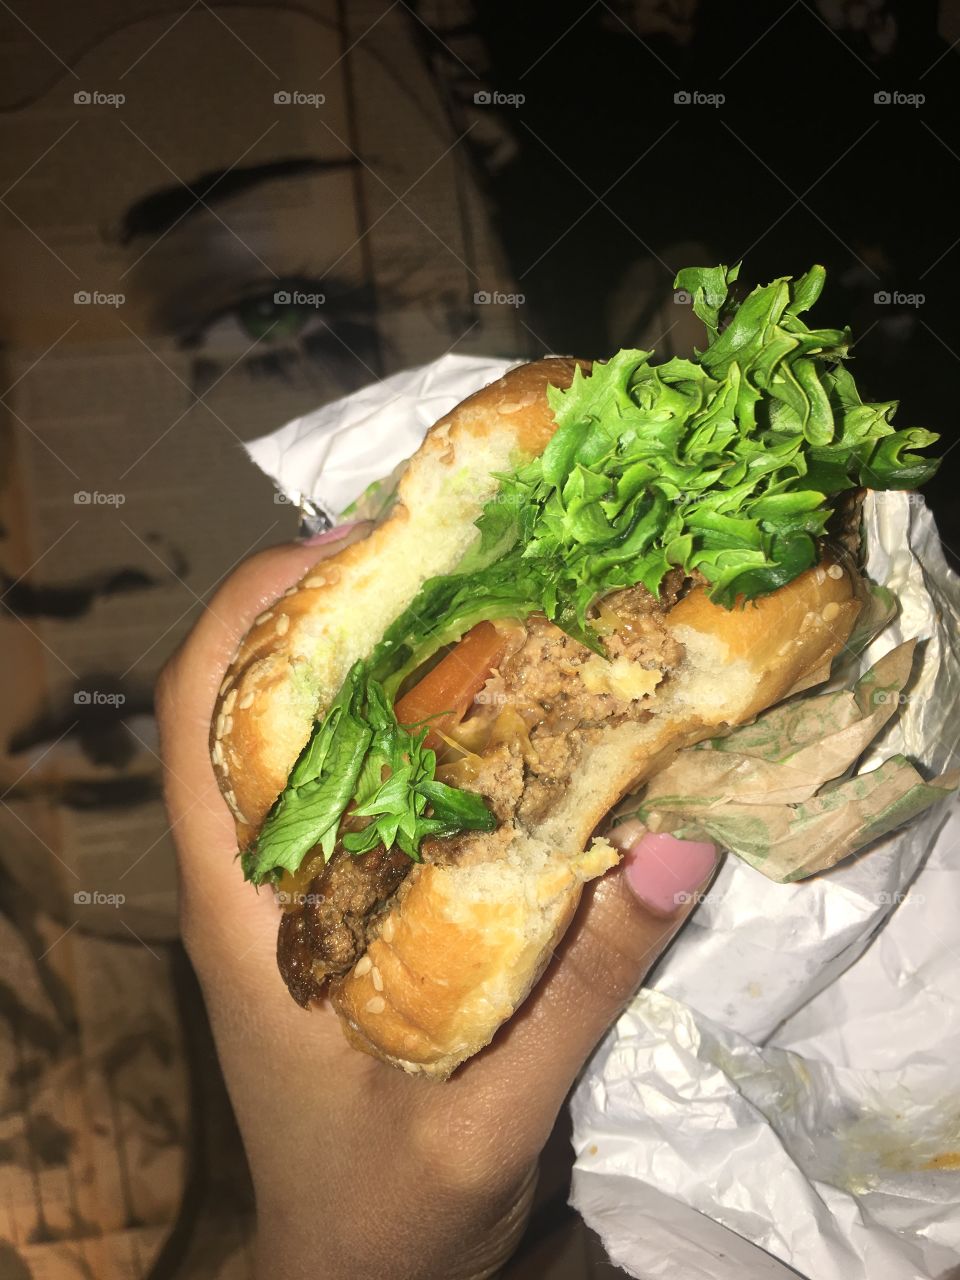 While in San Francisco I discovered the most delicious burger spot called Super Duper! And for about 3 nights it was a mid night snack I’d bring back to my hotel 